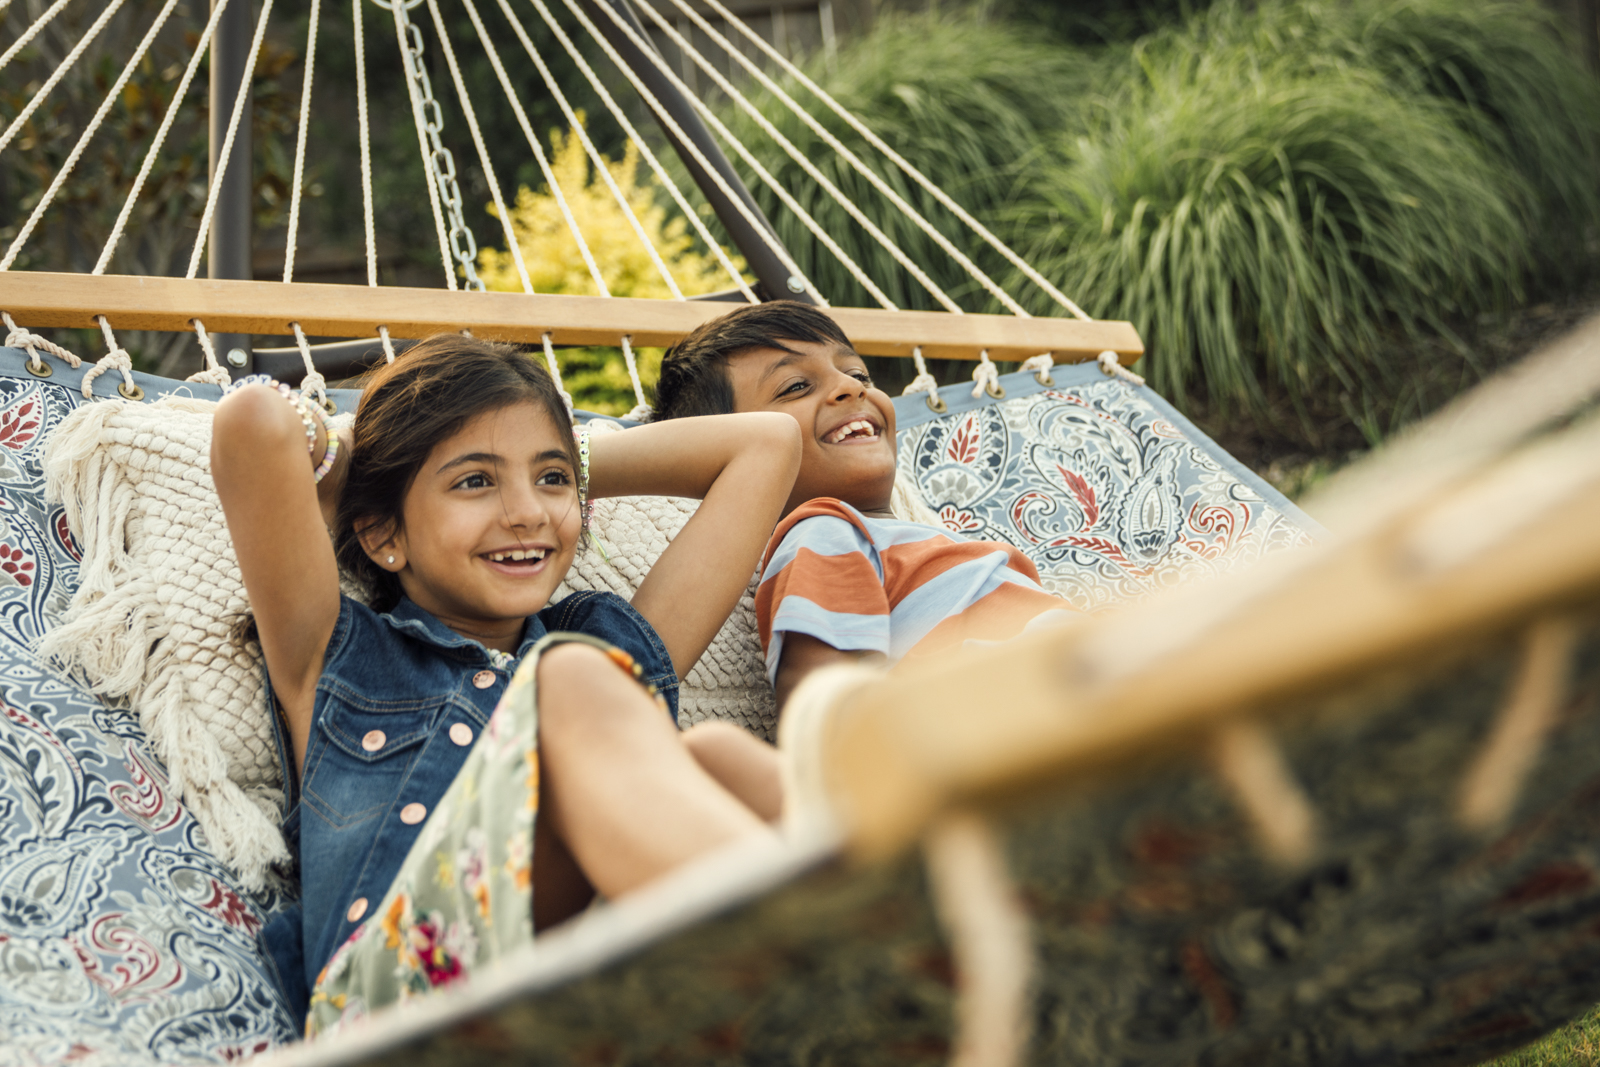 Boy-and-girl-laughing-together-in-hammock-20220608_Elyson_Scene4B_ModelHome_0122